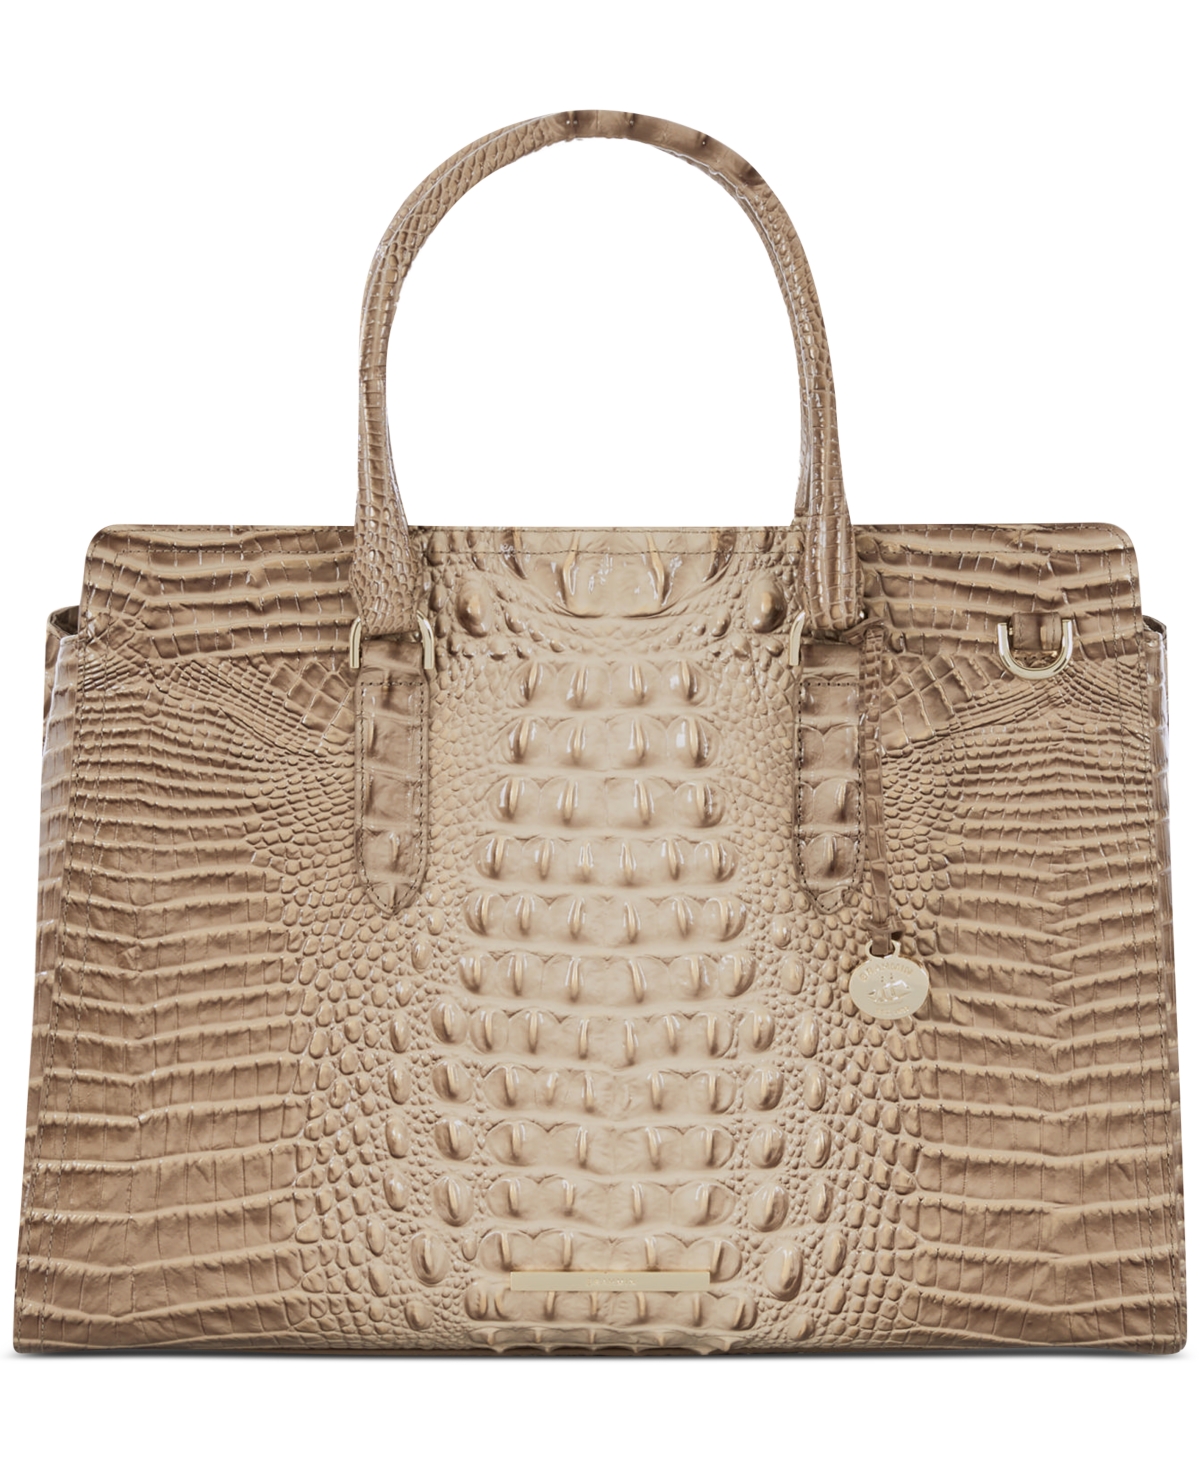 Finley Carryall Sesame Ombre Melbourne Large Leather Carryall - Sesame Ombre Melbourne